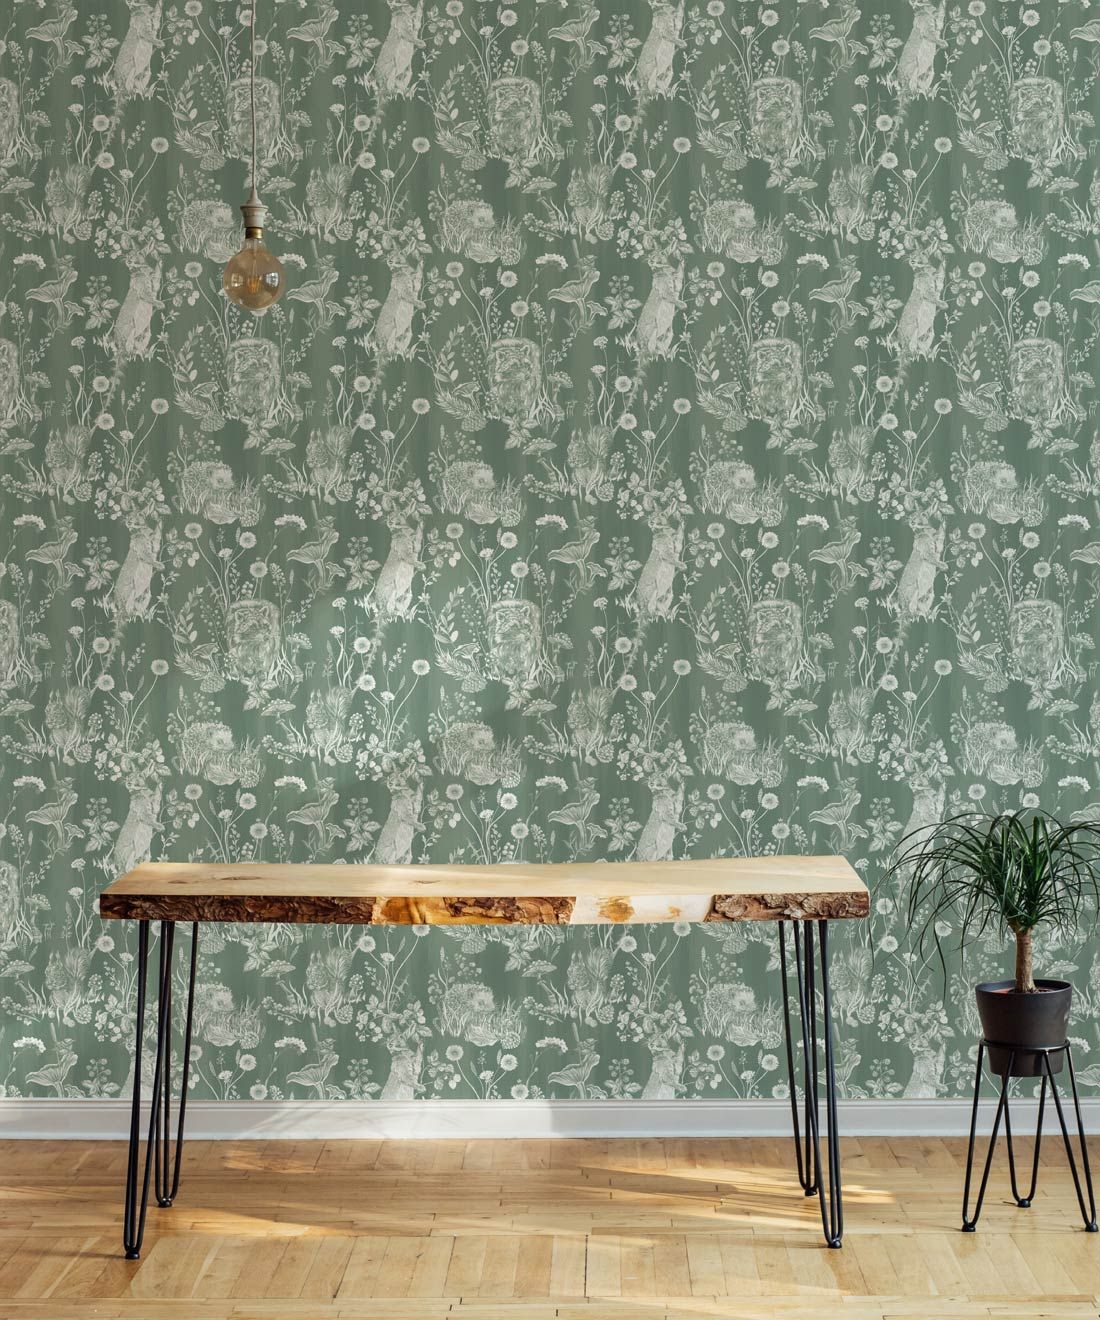 Woodland Friends Wallpaper • Forest Wallpaper with rabbits, hares, raccoons • Iryna Ruggeri • Green • Insitu